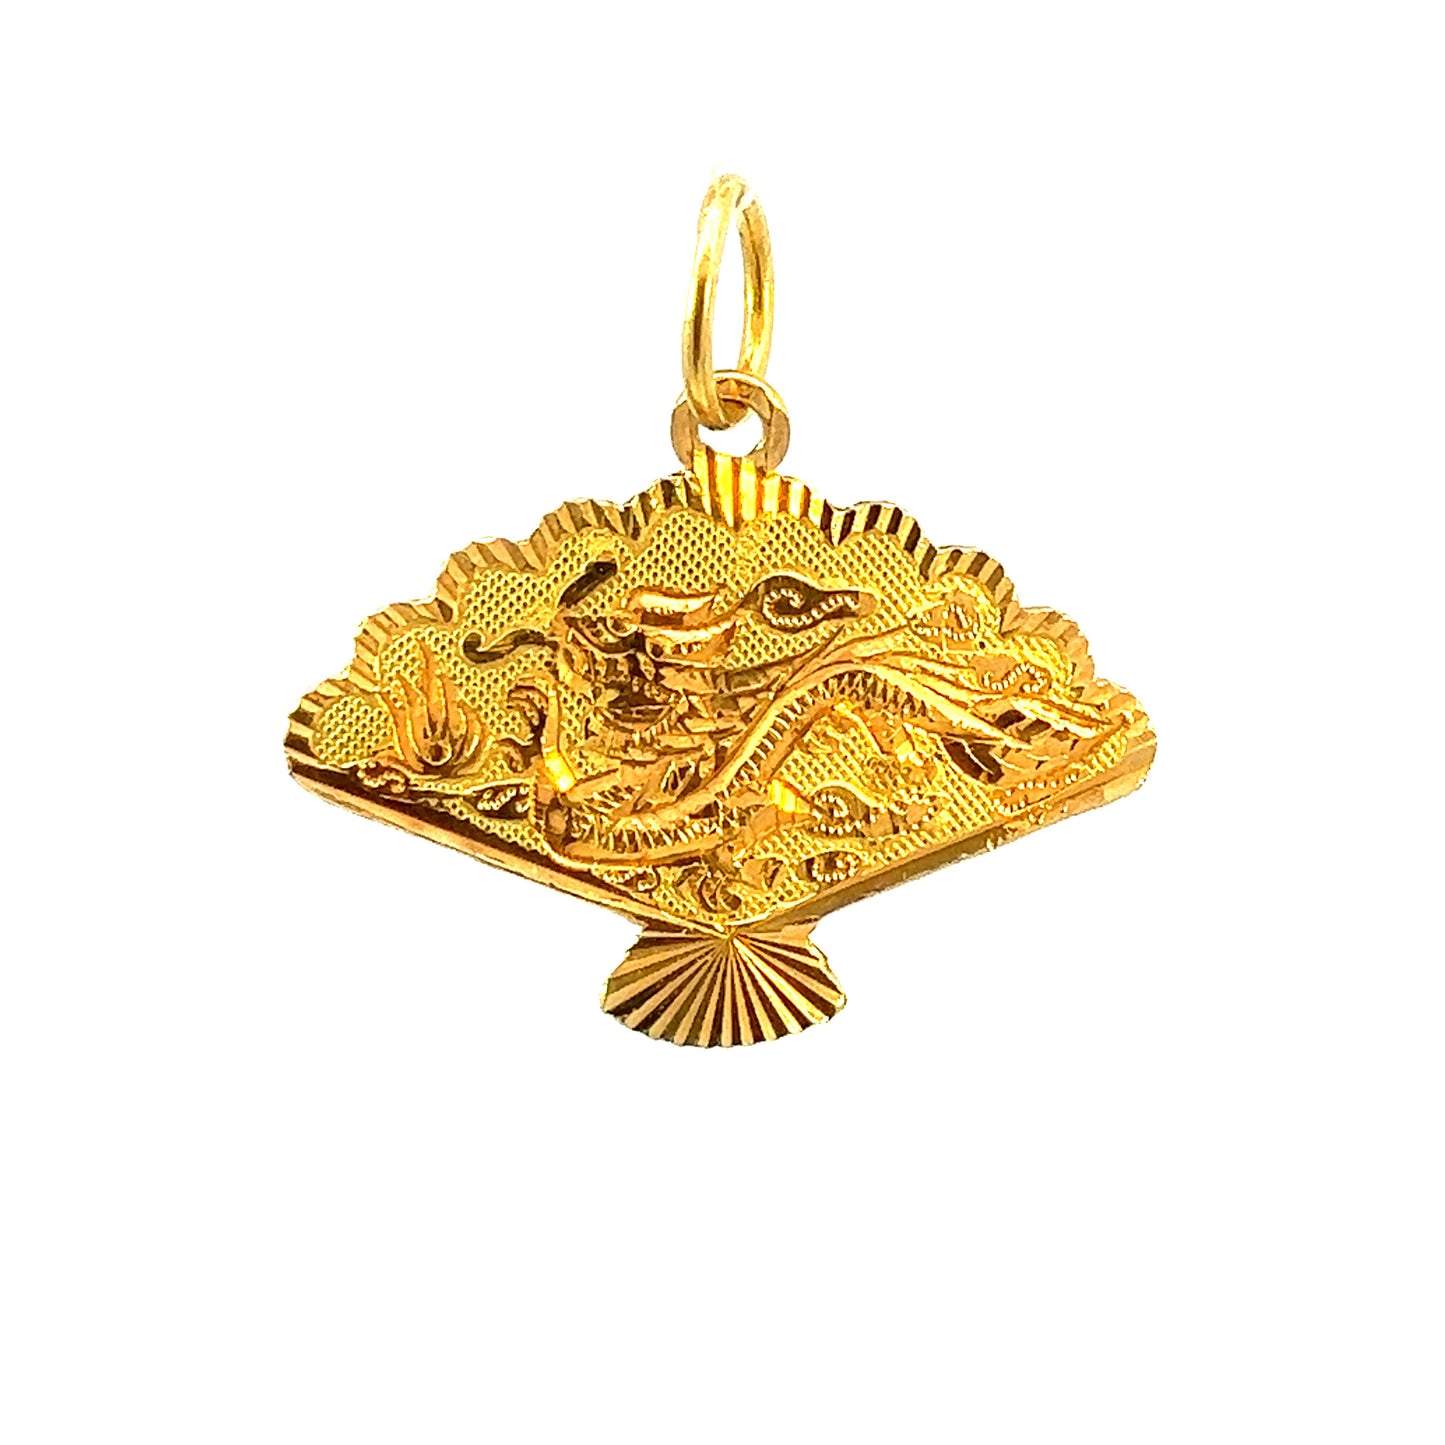 GOLD PENDANT ( 22K ) ( 1.62g ) - 0004428 Chain sold separately